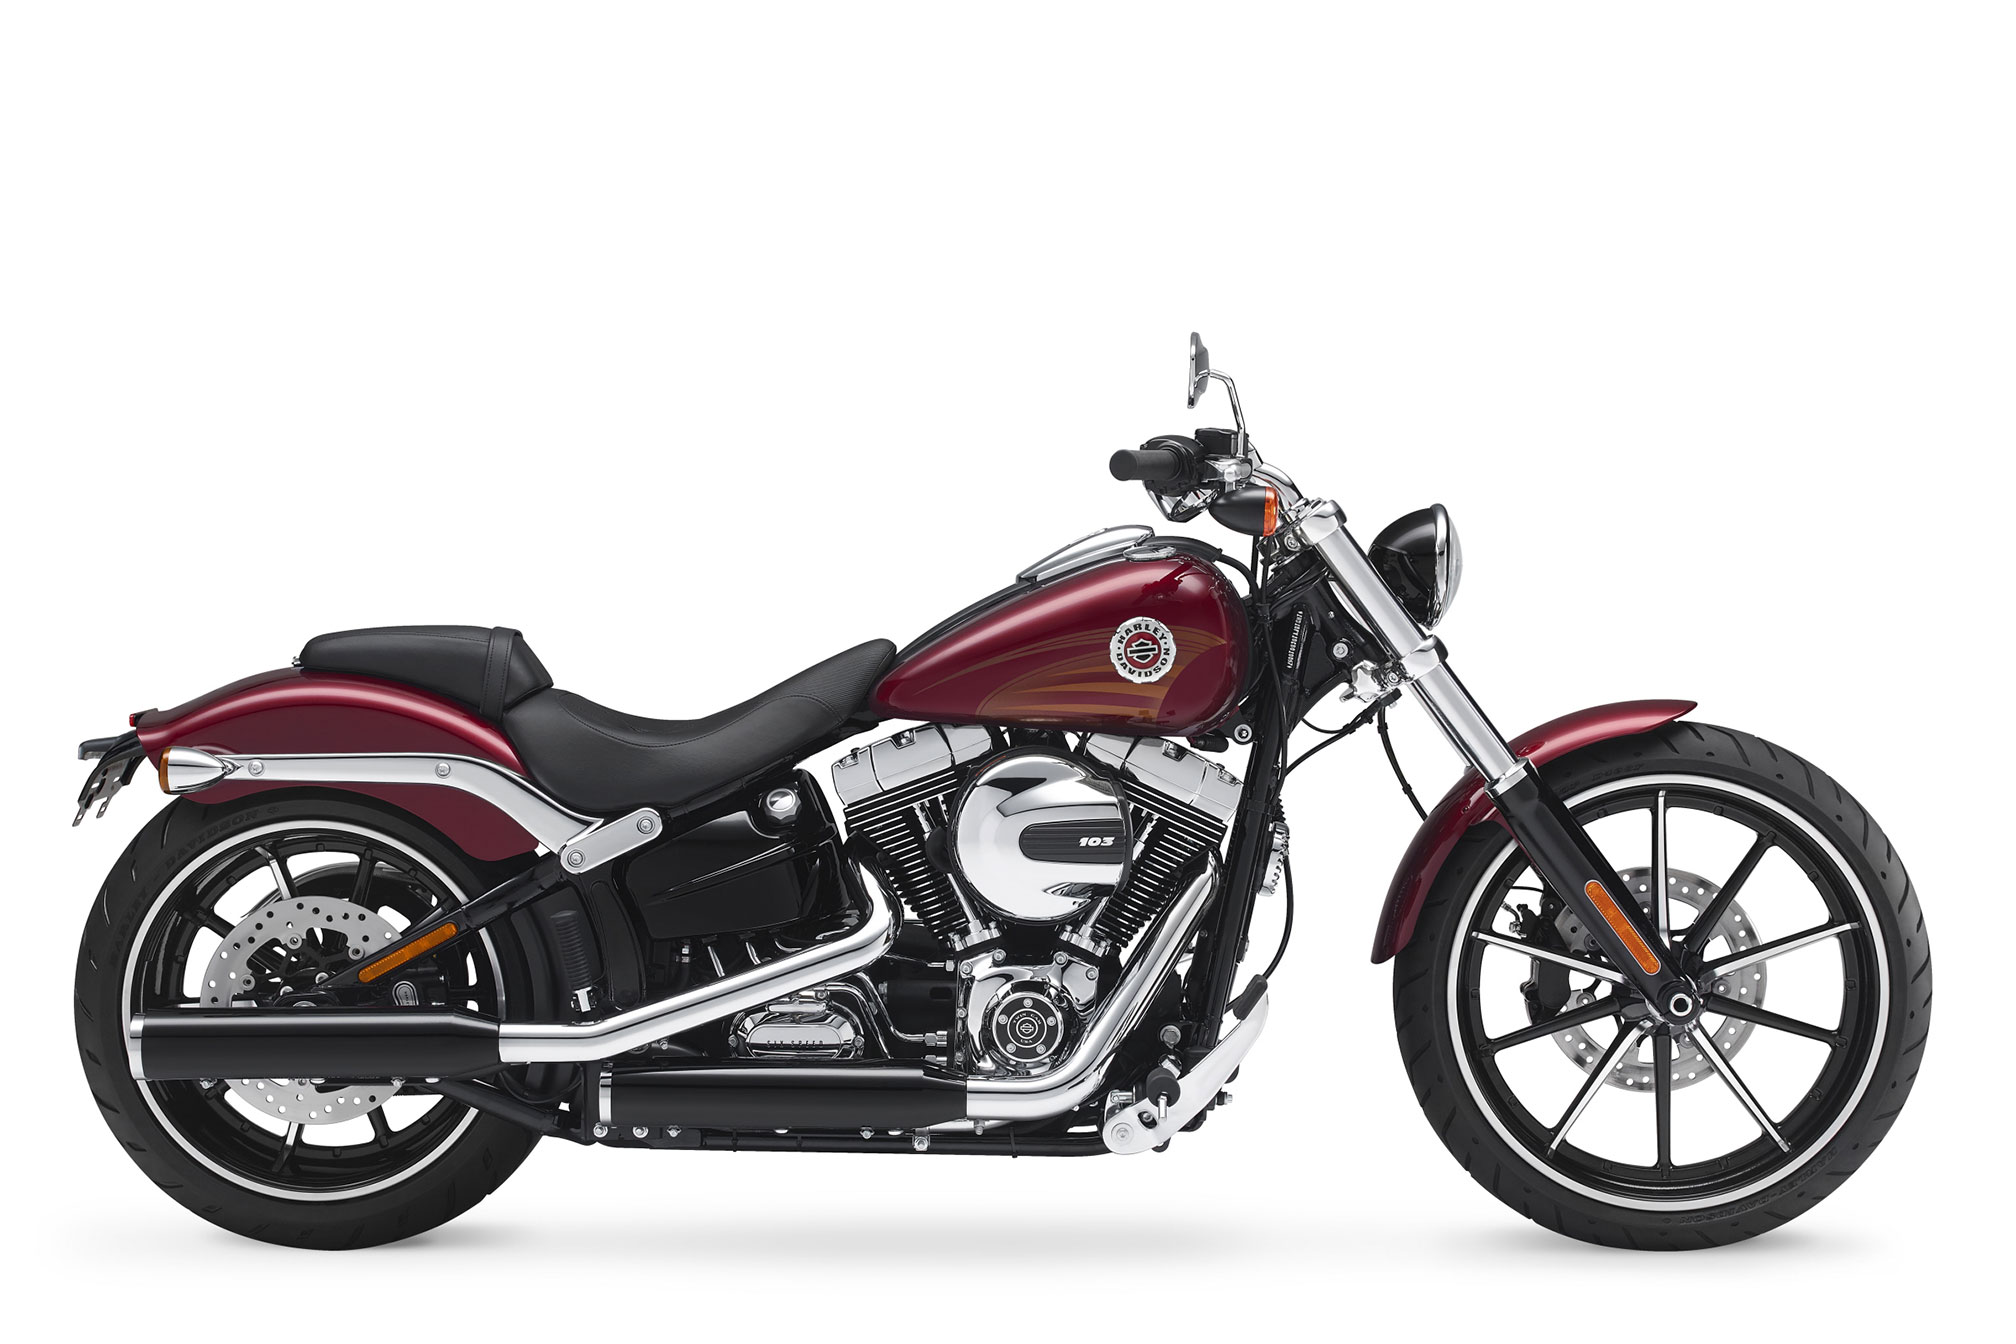 2016 Harley Davidson Softail Breakout Review